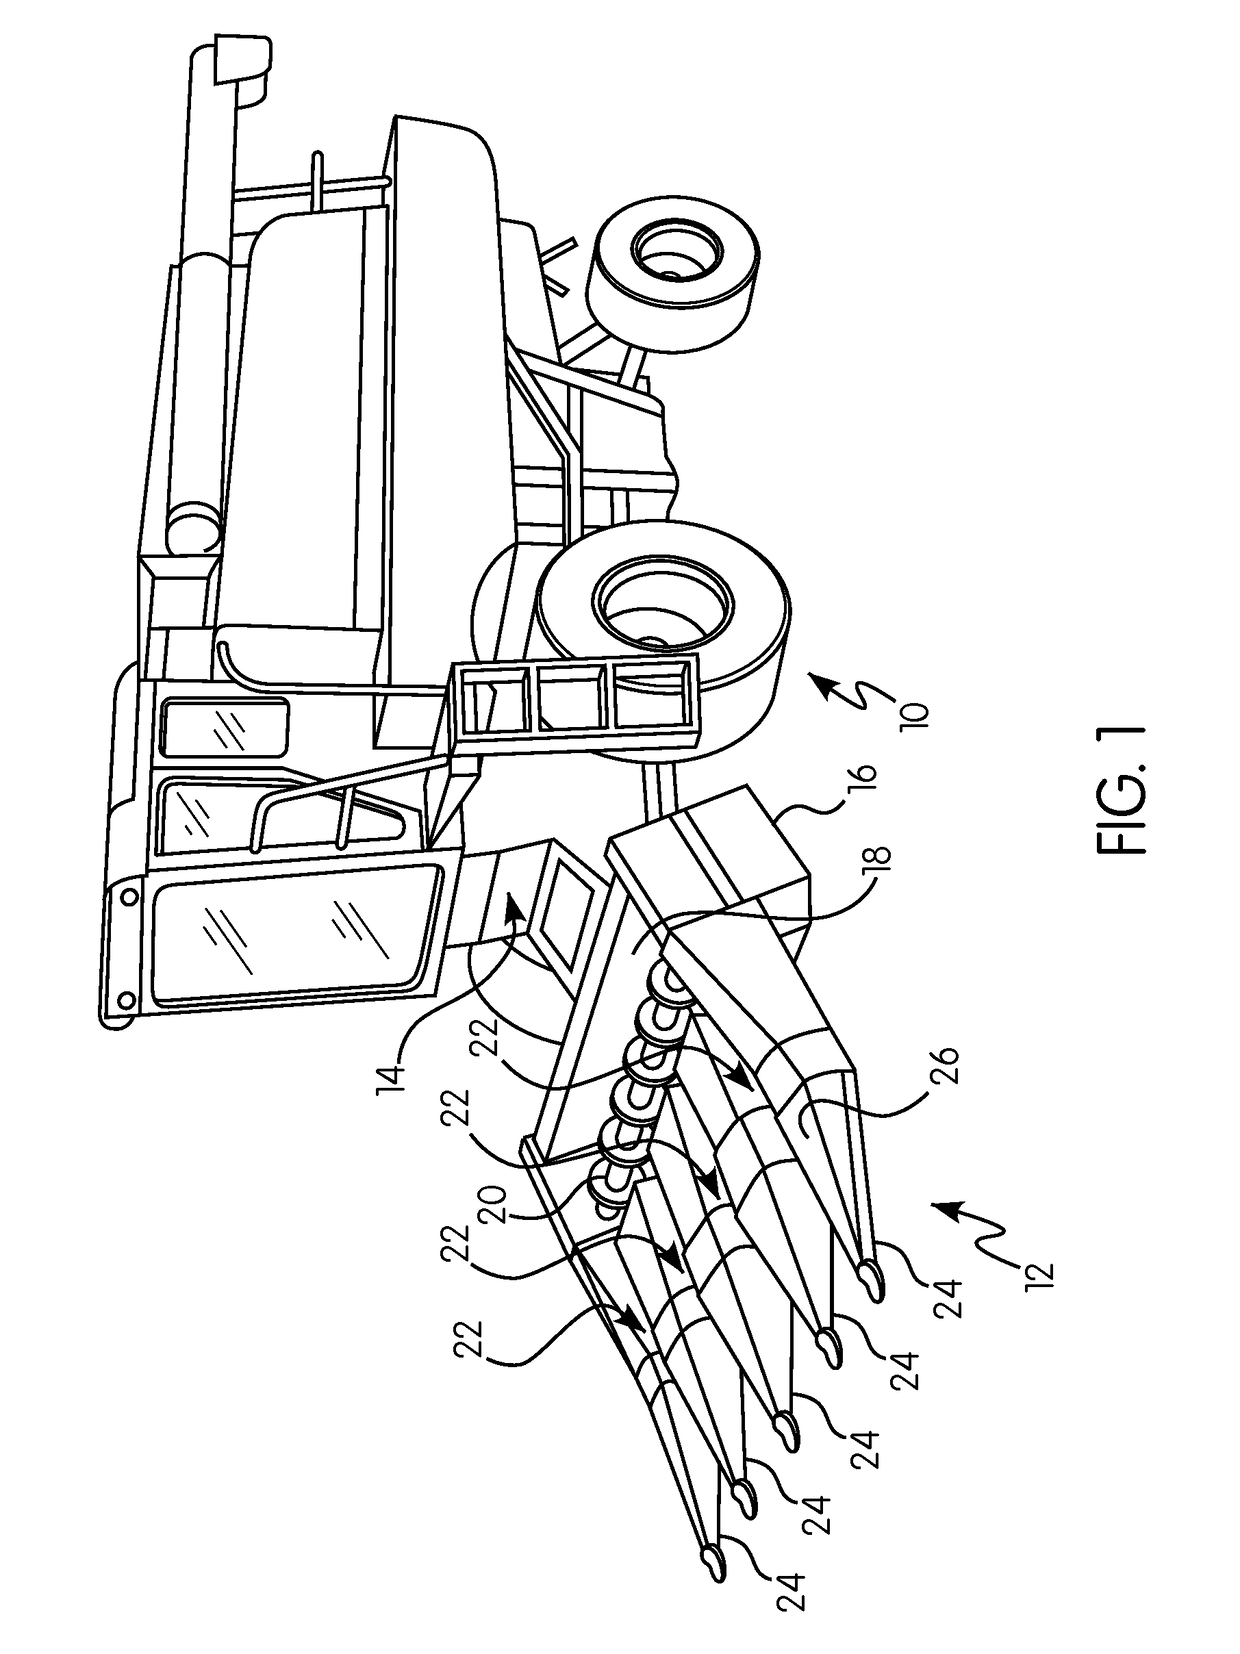 Multi-segmented deck plate auto adjustment mechanism for a harvester row unit